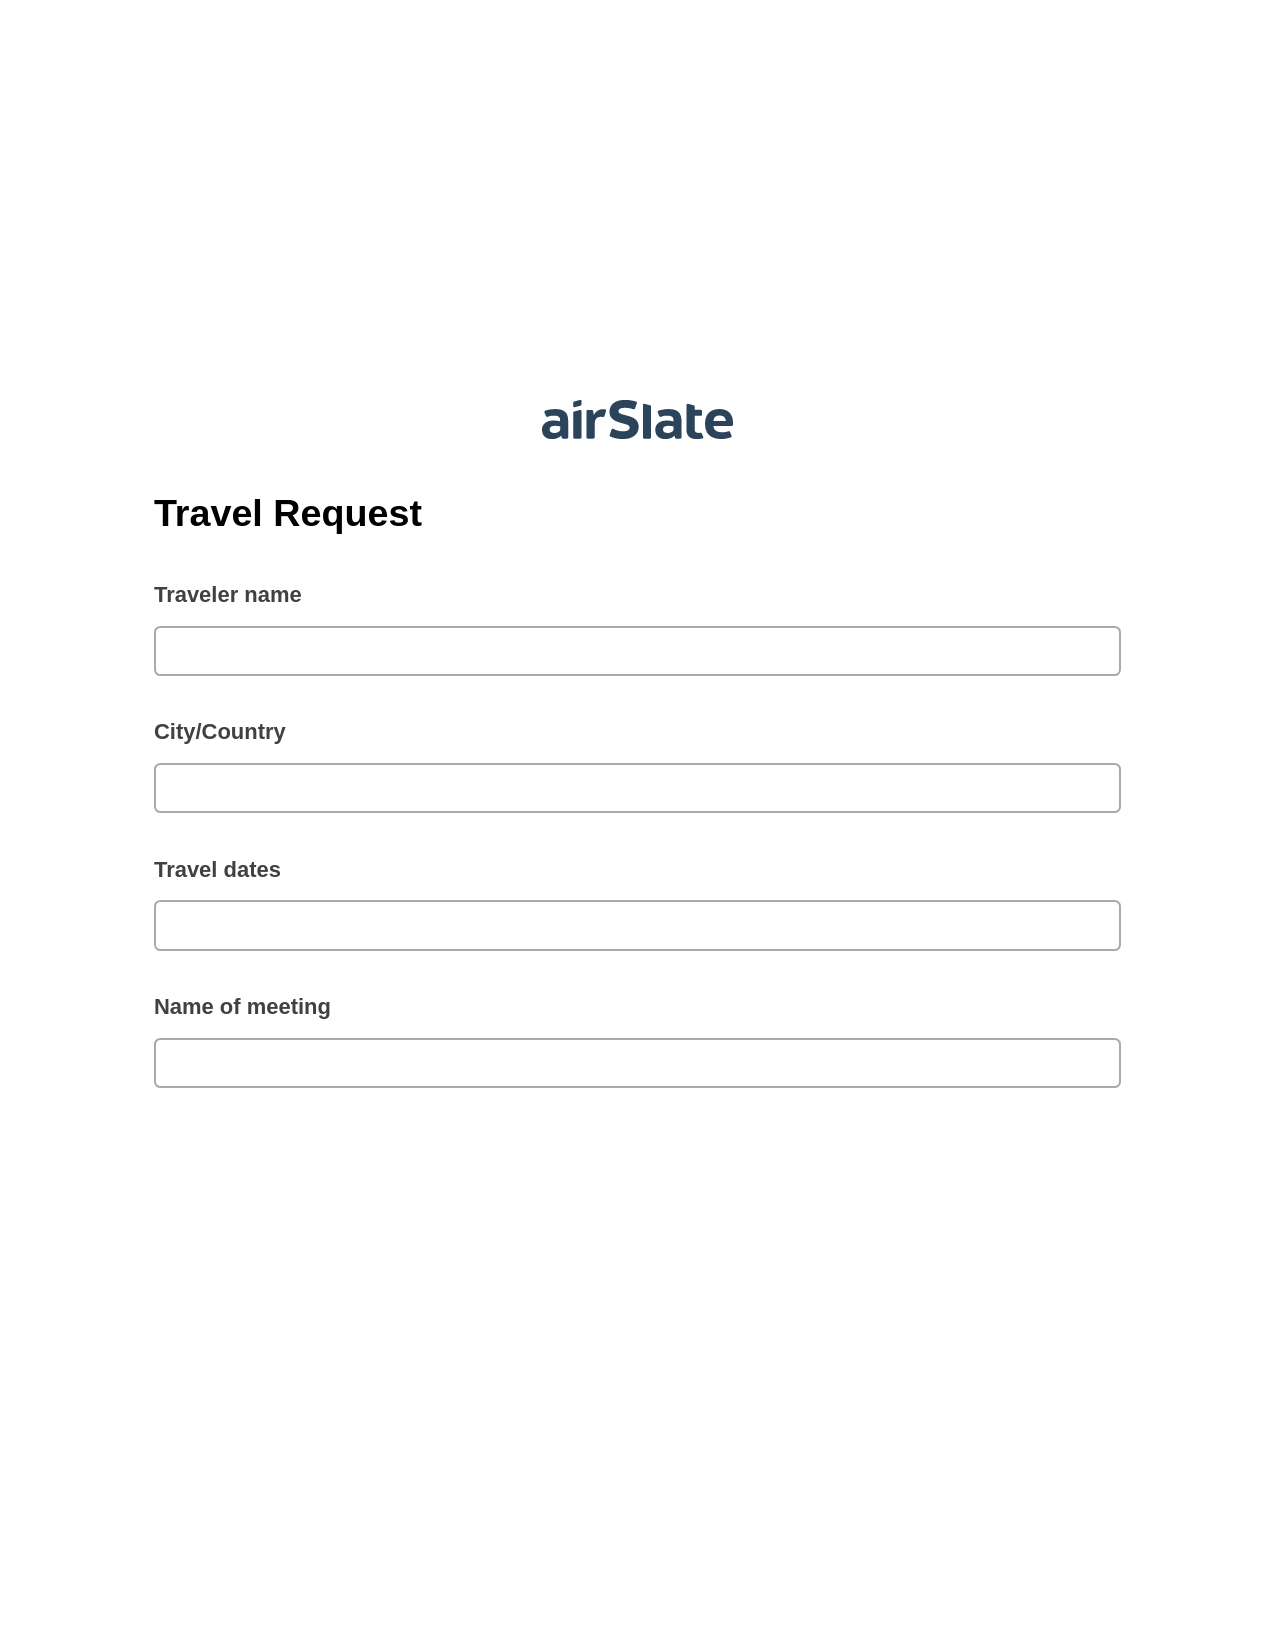 Travel Request Pre-fill from another Slate Bot, Pre-fill with Custom Data Bot, Export to Smartsheet